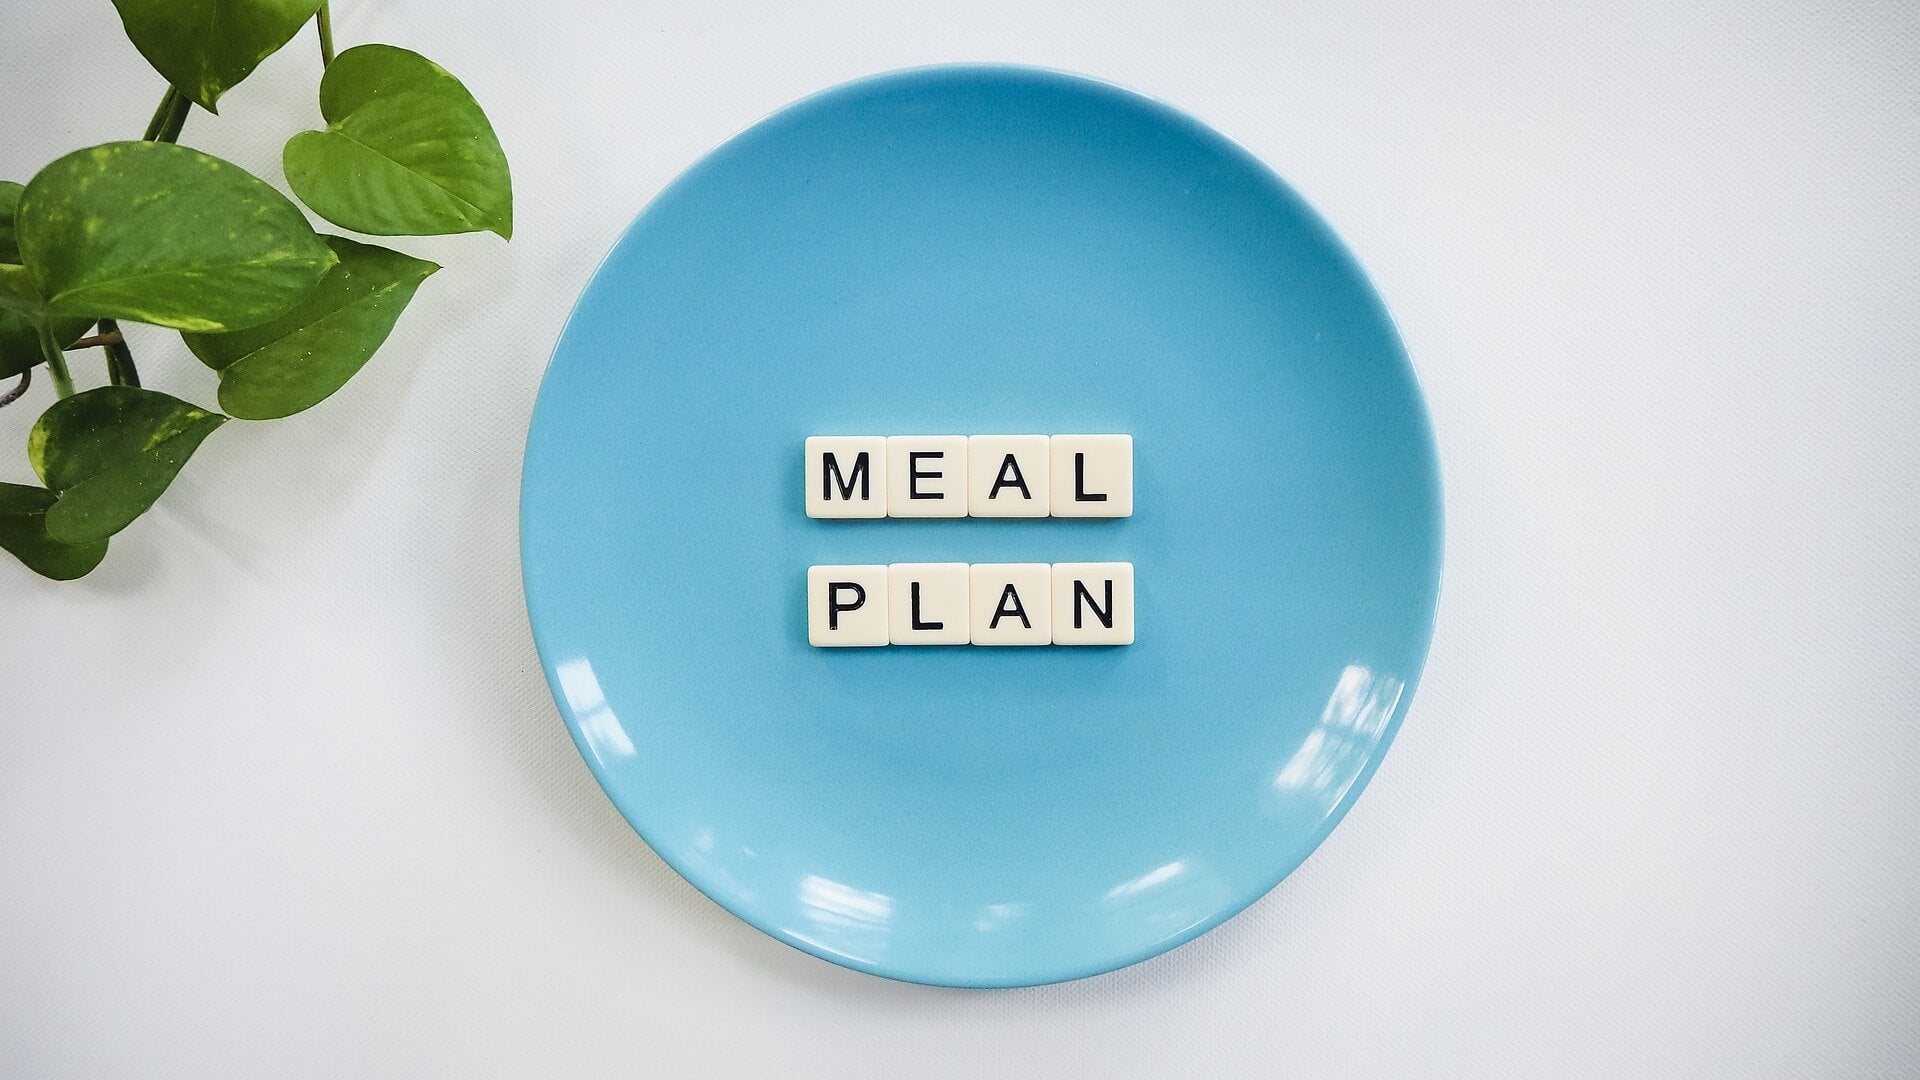 A blue plate with white text blocks on top reading “Meal Plan”